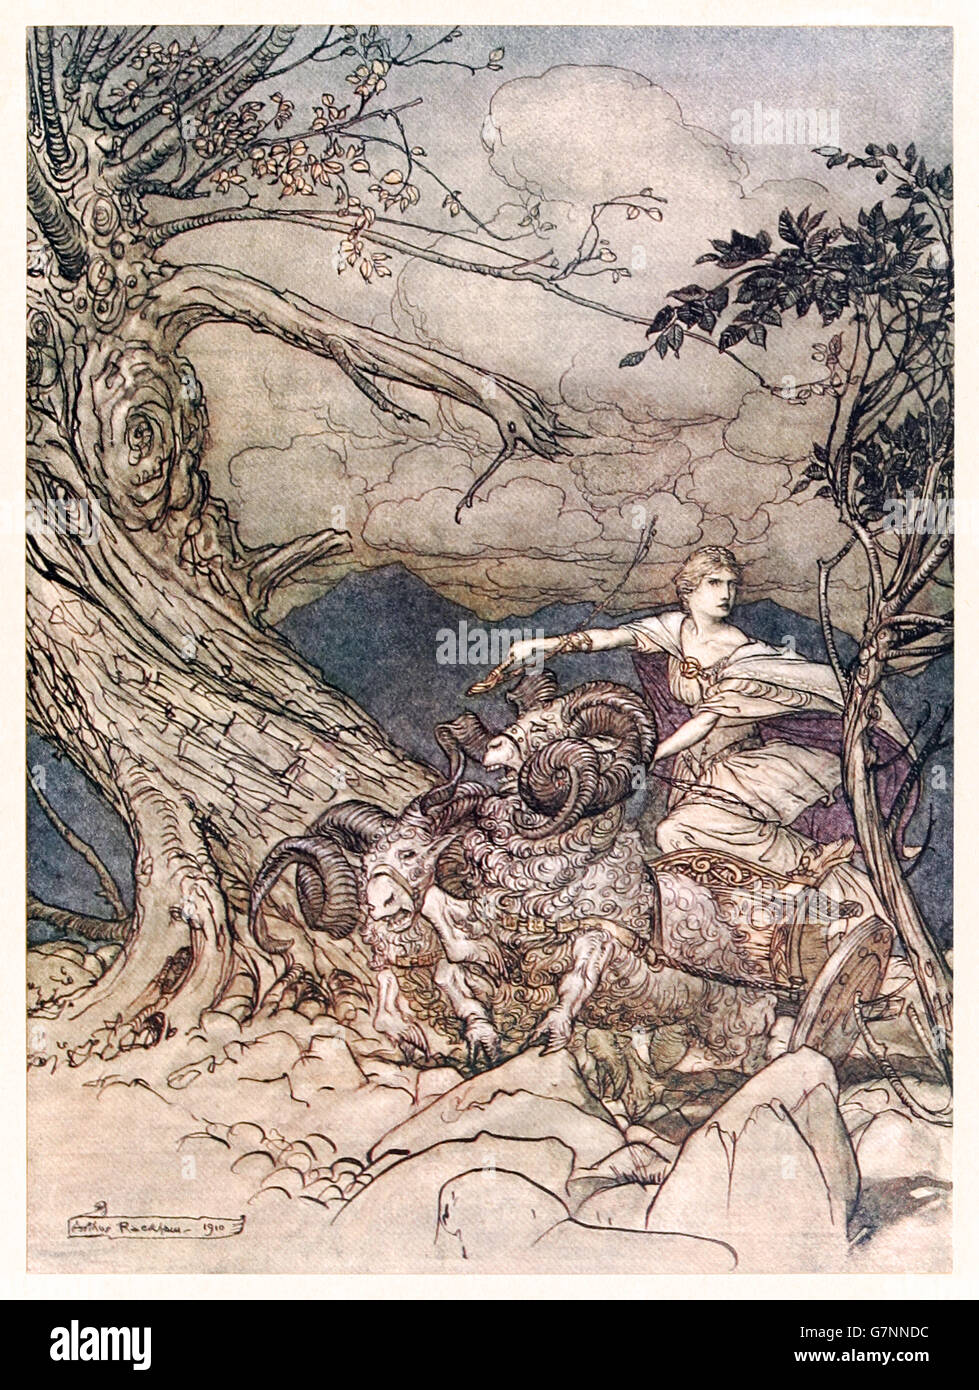 'Fricka approaches in anger' from ‘The Rhinegold & the Valkyrie’ illustrated by Arthur Rackham (1867-1939), published in 1910. Fricka goddess of marriage, wife of the chief of the Gods, Wotan. Stock Photo